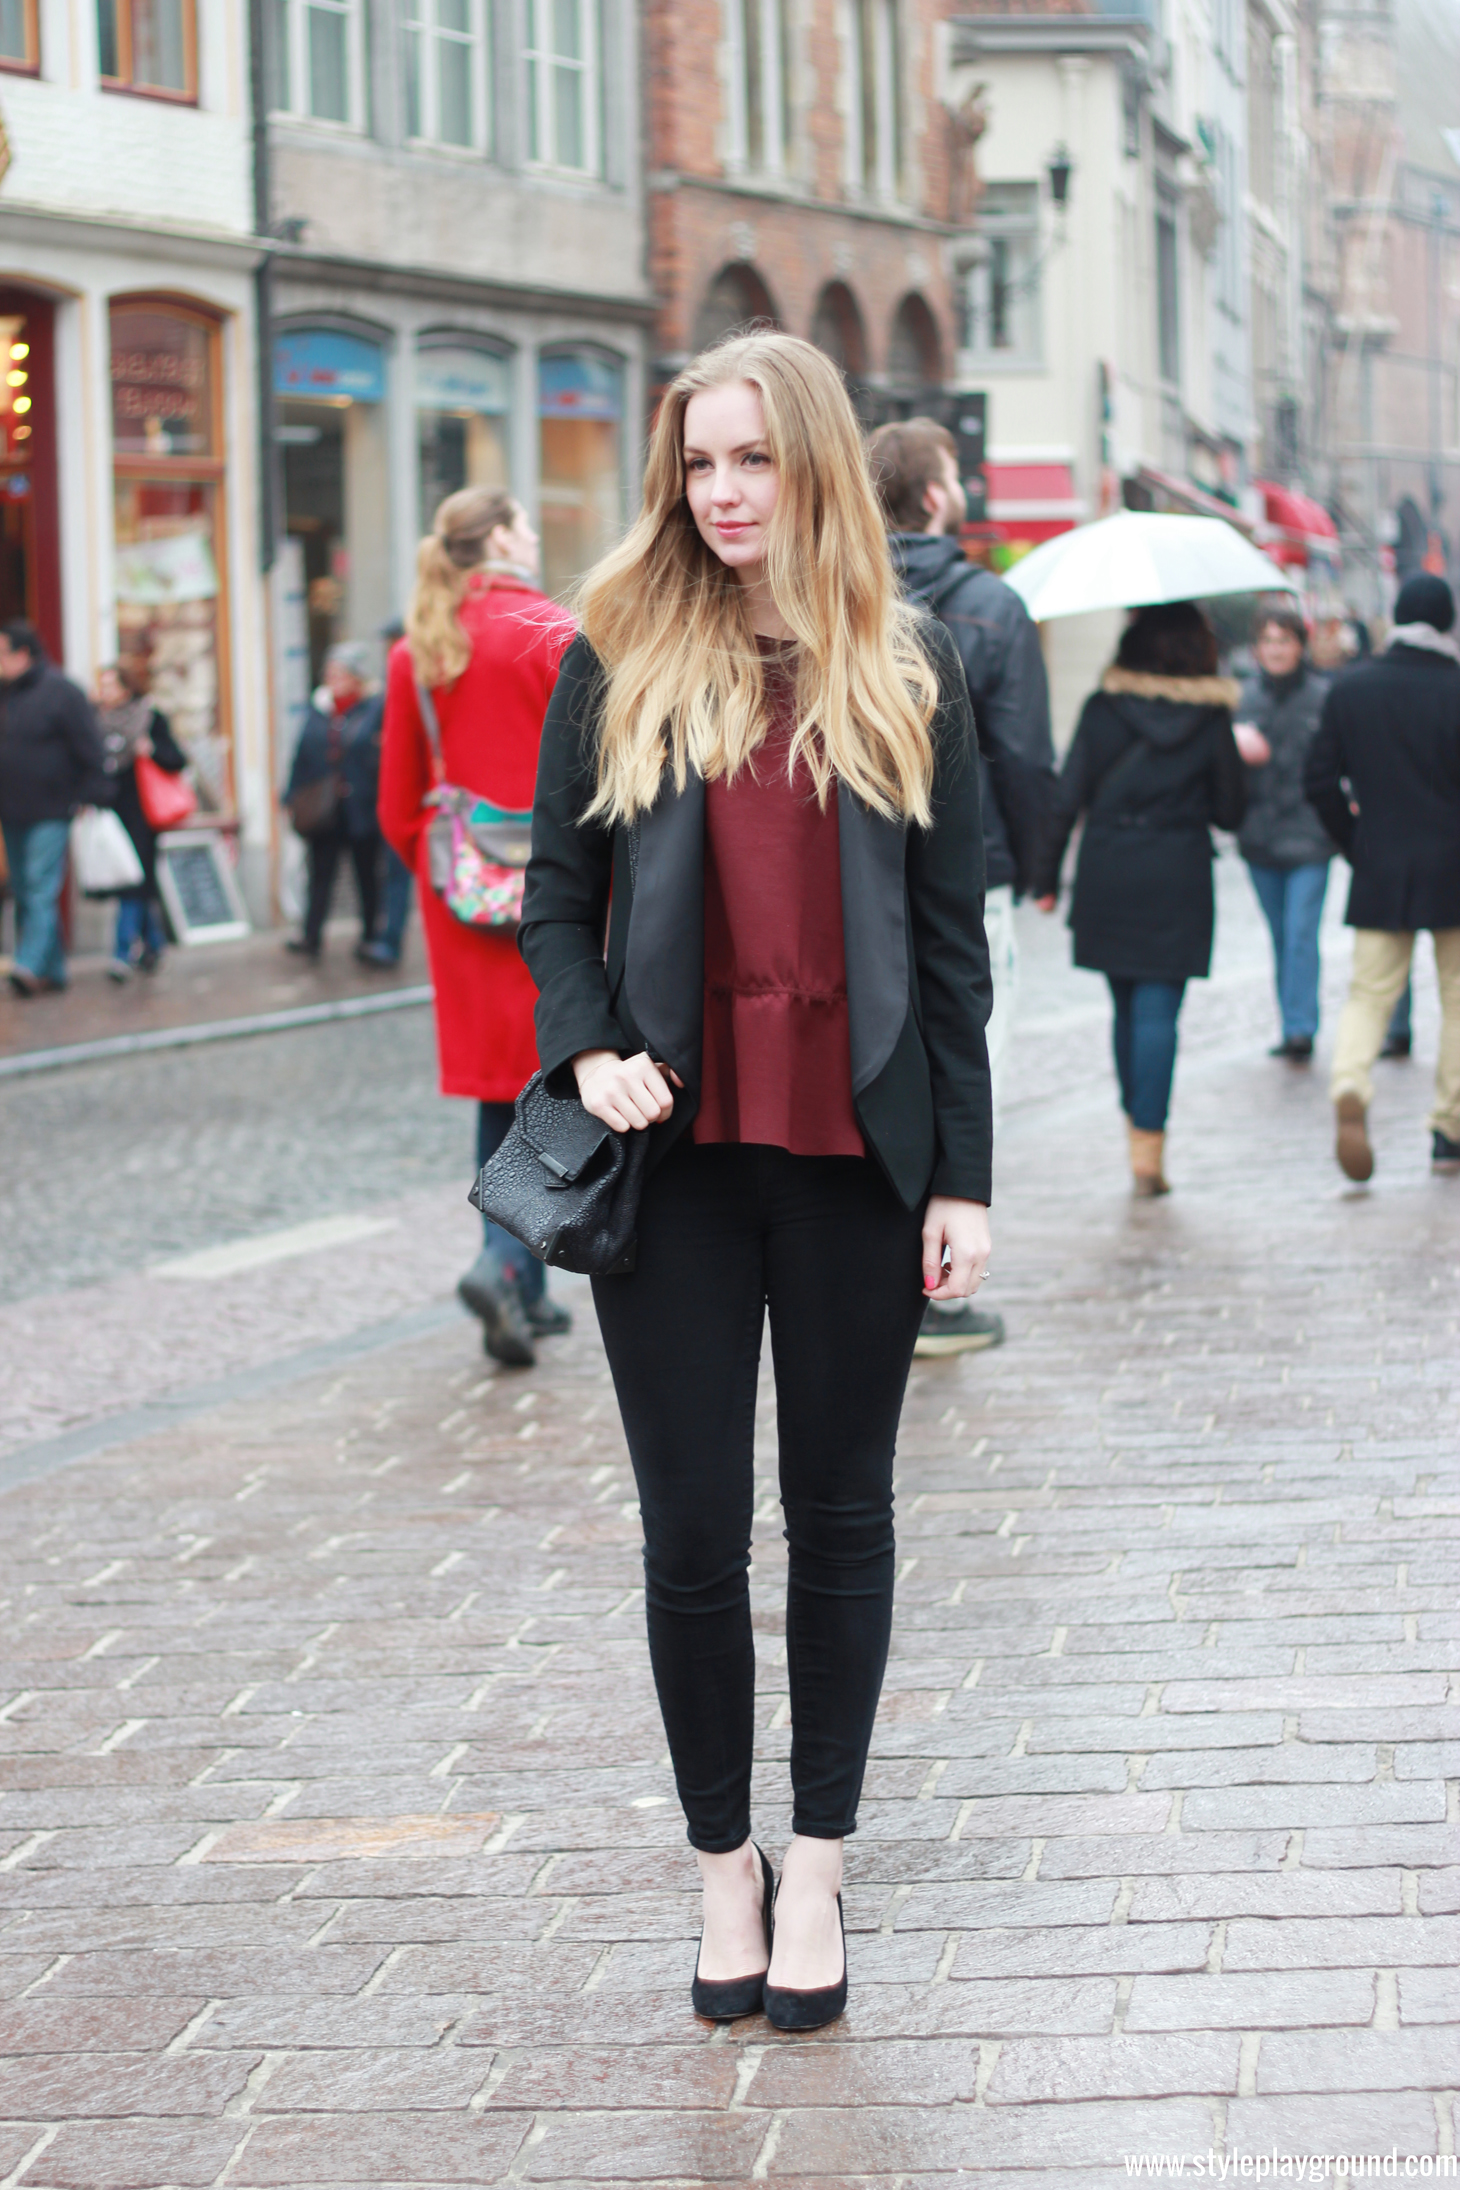 Axelle Blanpain from Style playground is wearing an H&M top, Michael Kors blazer, J Brand skinny jeans, J crew pumps & Alexander Wang bag 